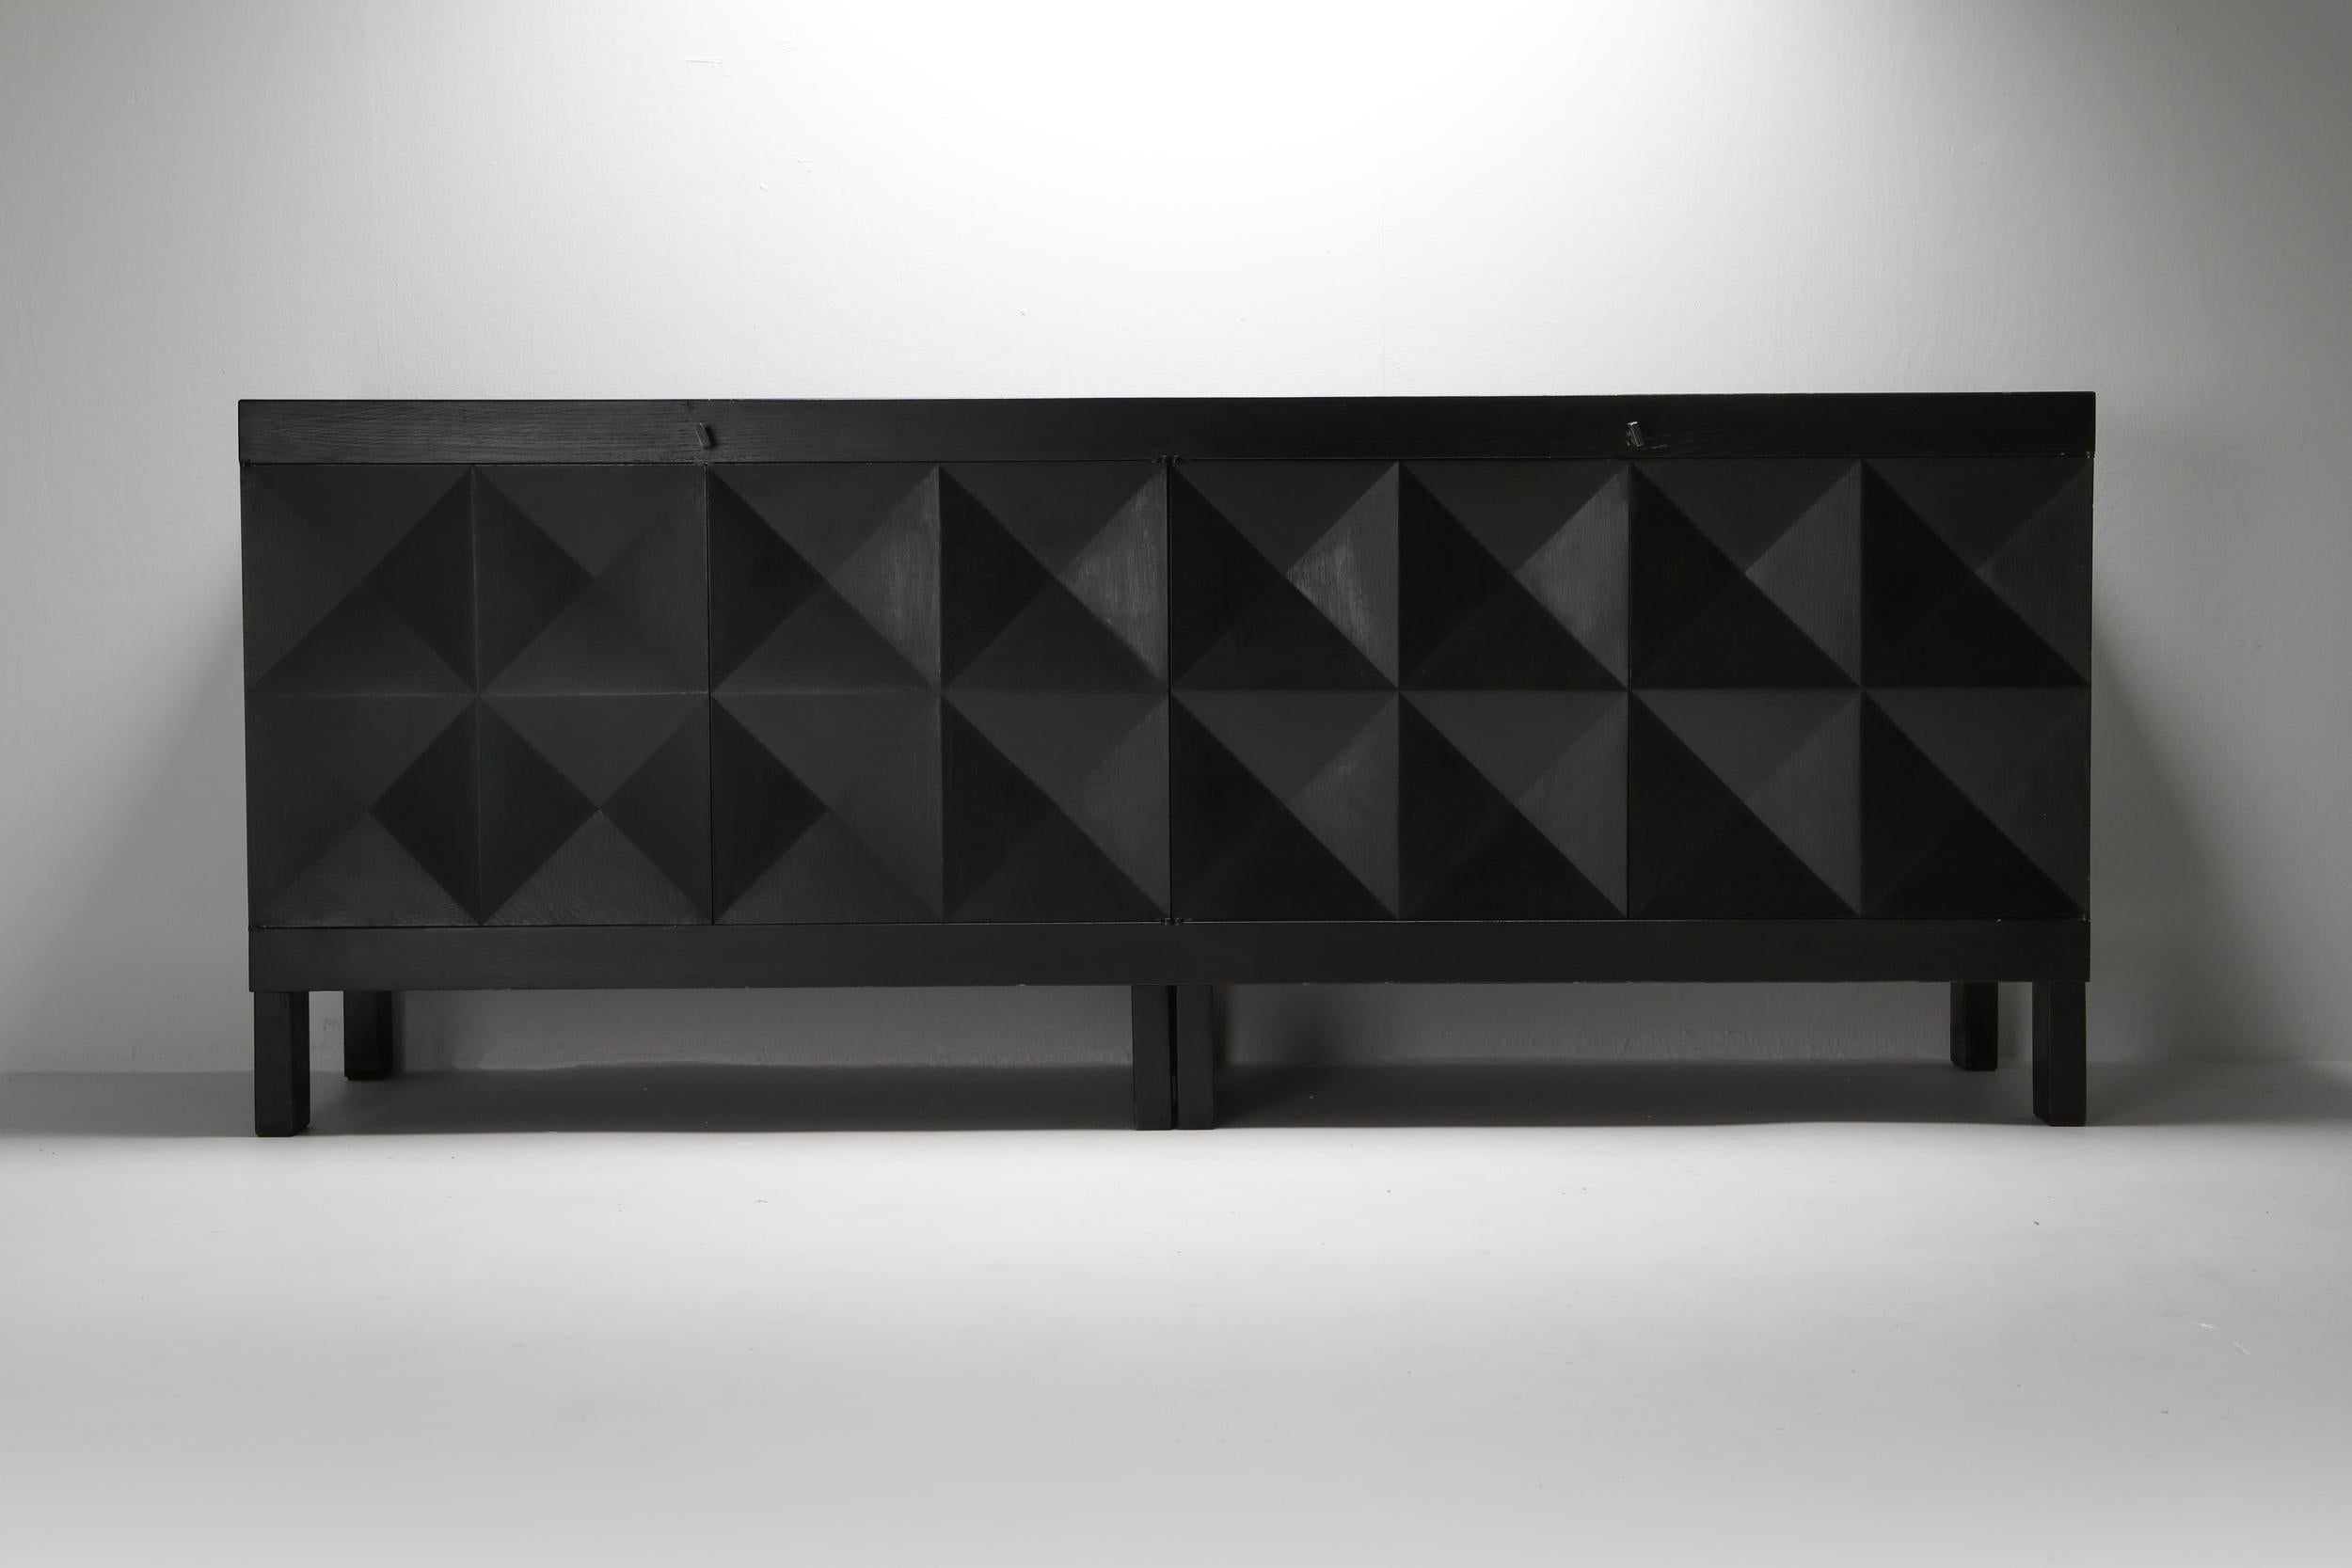 Geometrical credenza, De Coene Belgium, ebonised oak, 1970s

De Coene was founded in 1887 in Kortrijk (Belgium) by Jozef de Coene, who was at that time 13 years old. In 1895 his younger brother Adolphe joined the company. In their early years De